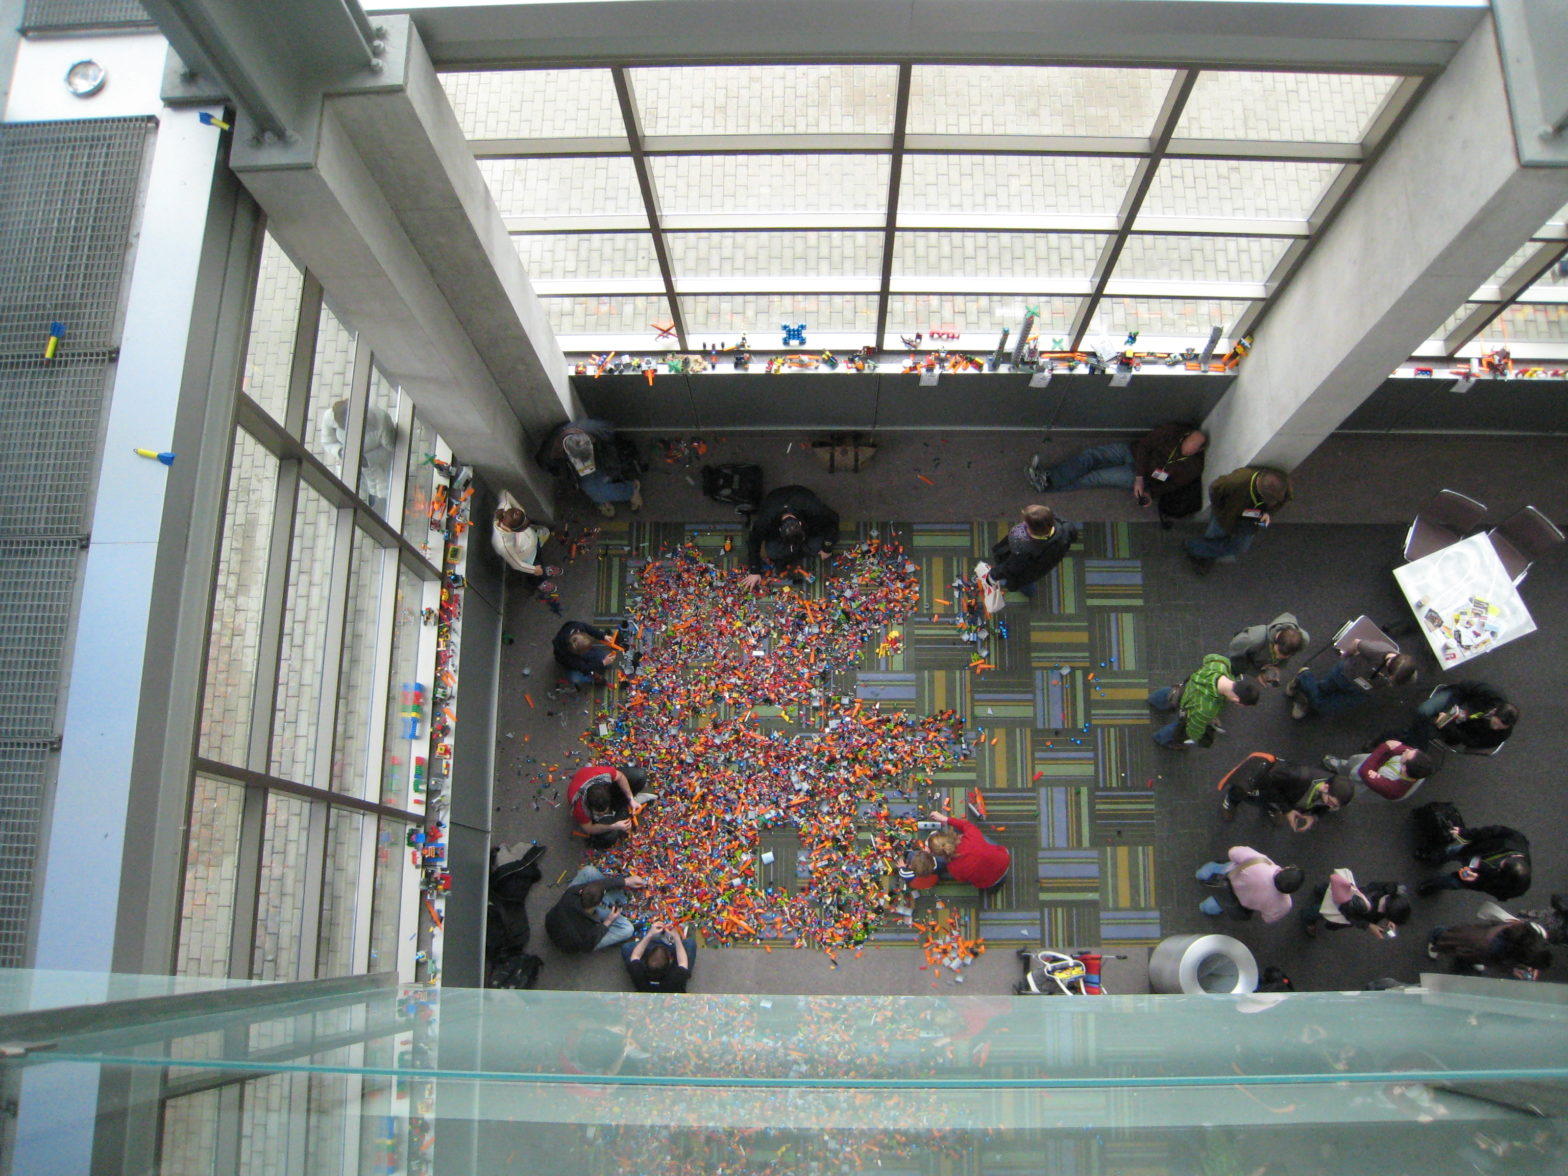 overhead view of people playing in the Lego pit, Austin Conference Center, SxSW 2009